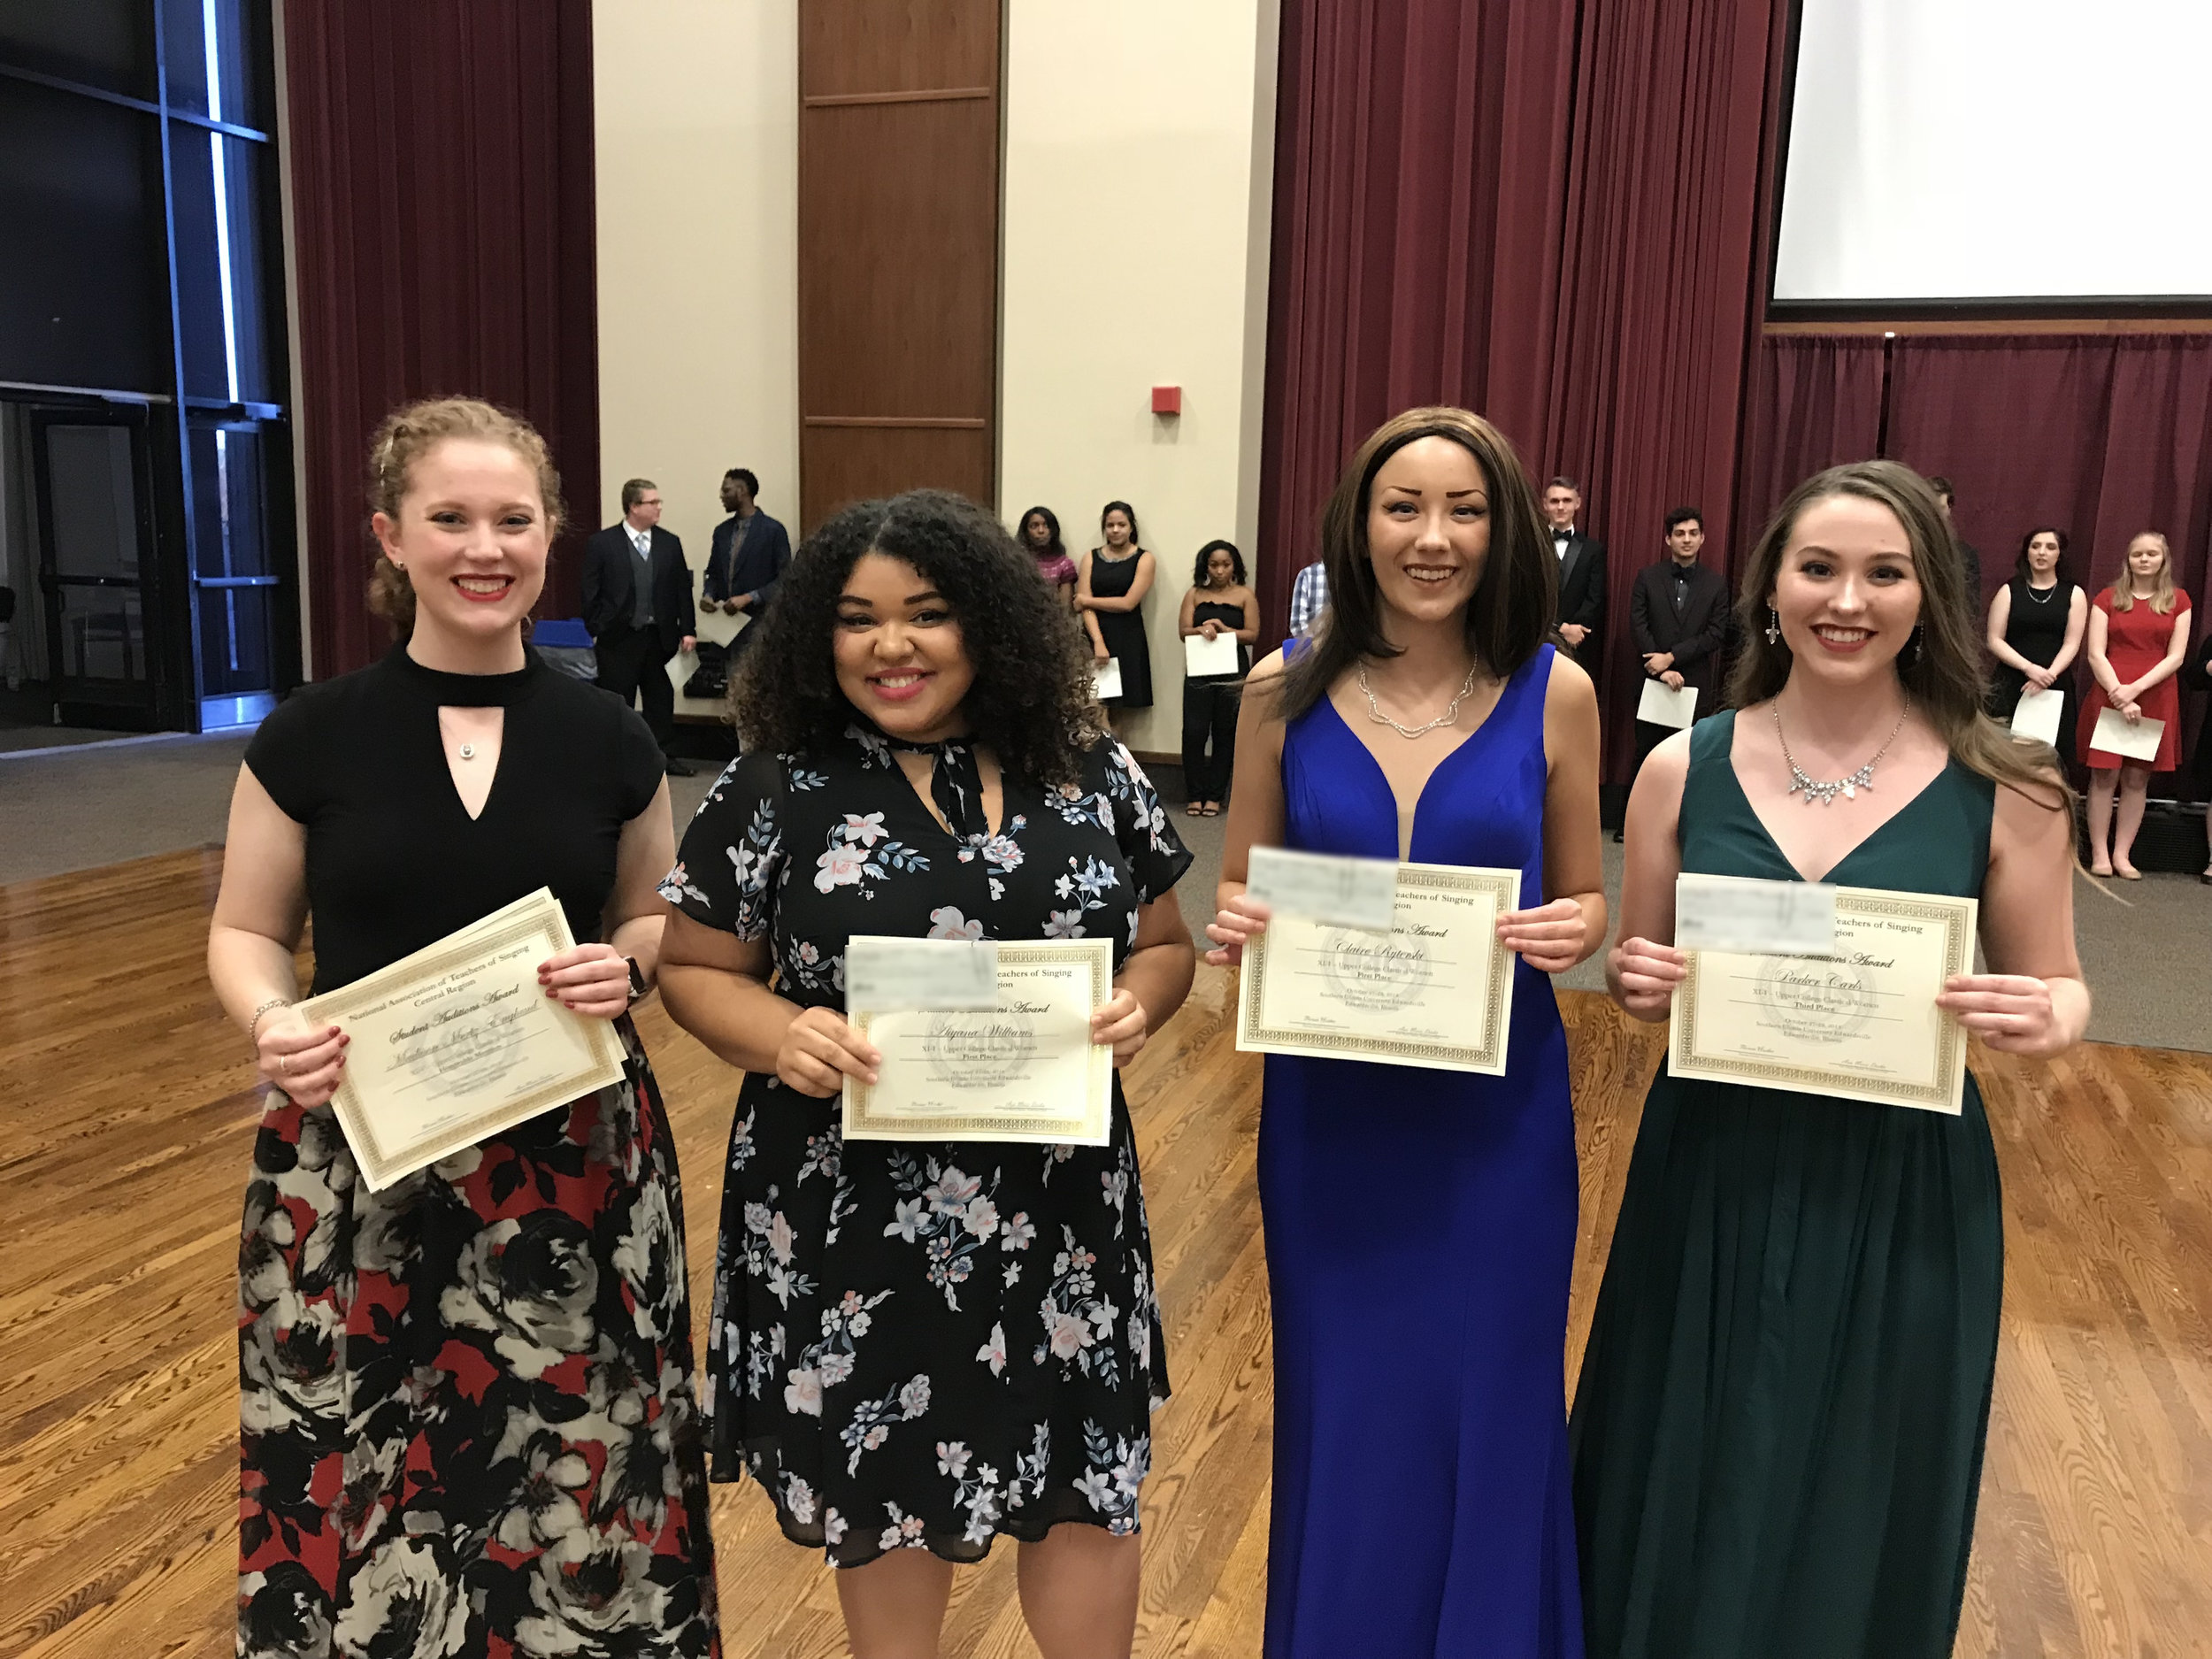 Category 1-1 - Upper College Classical Women